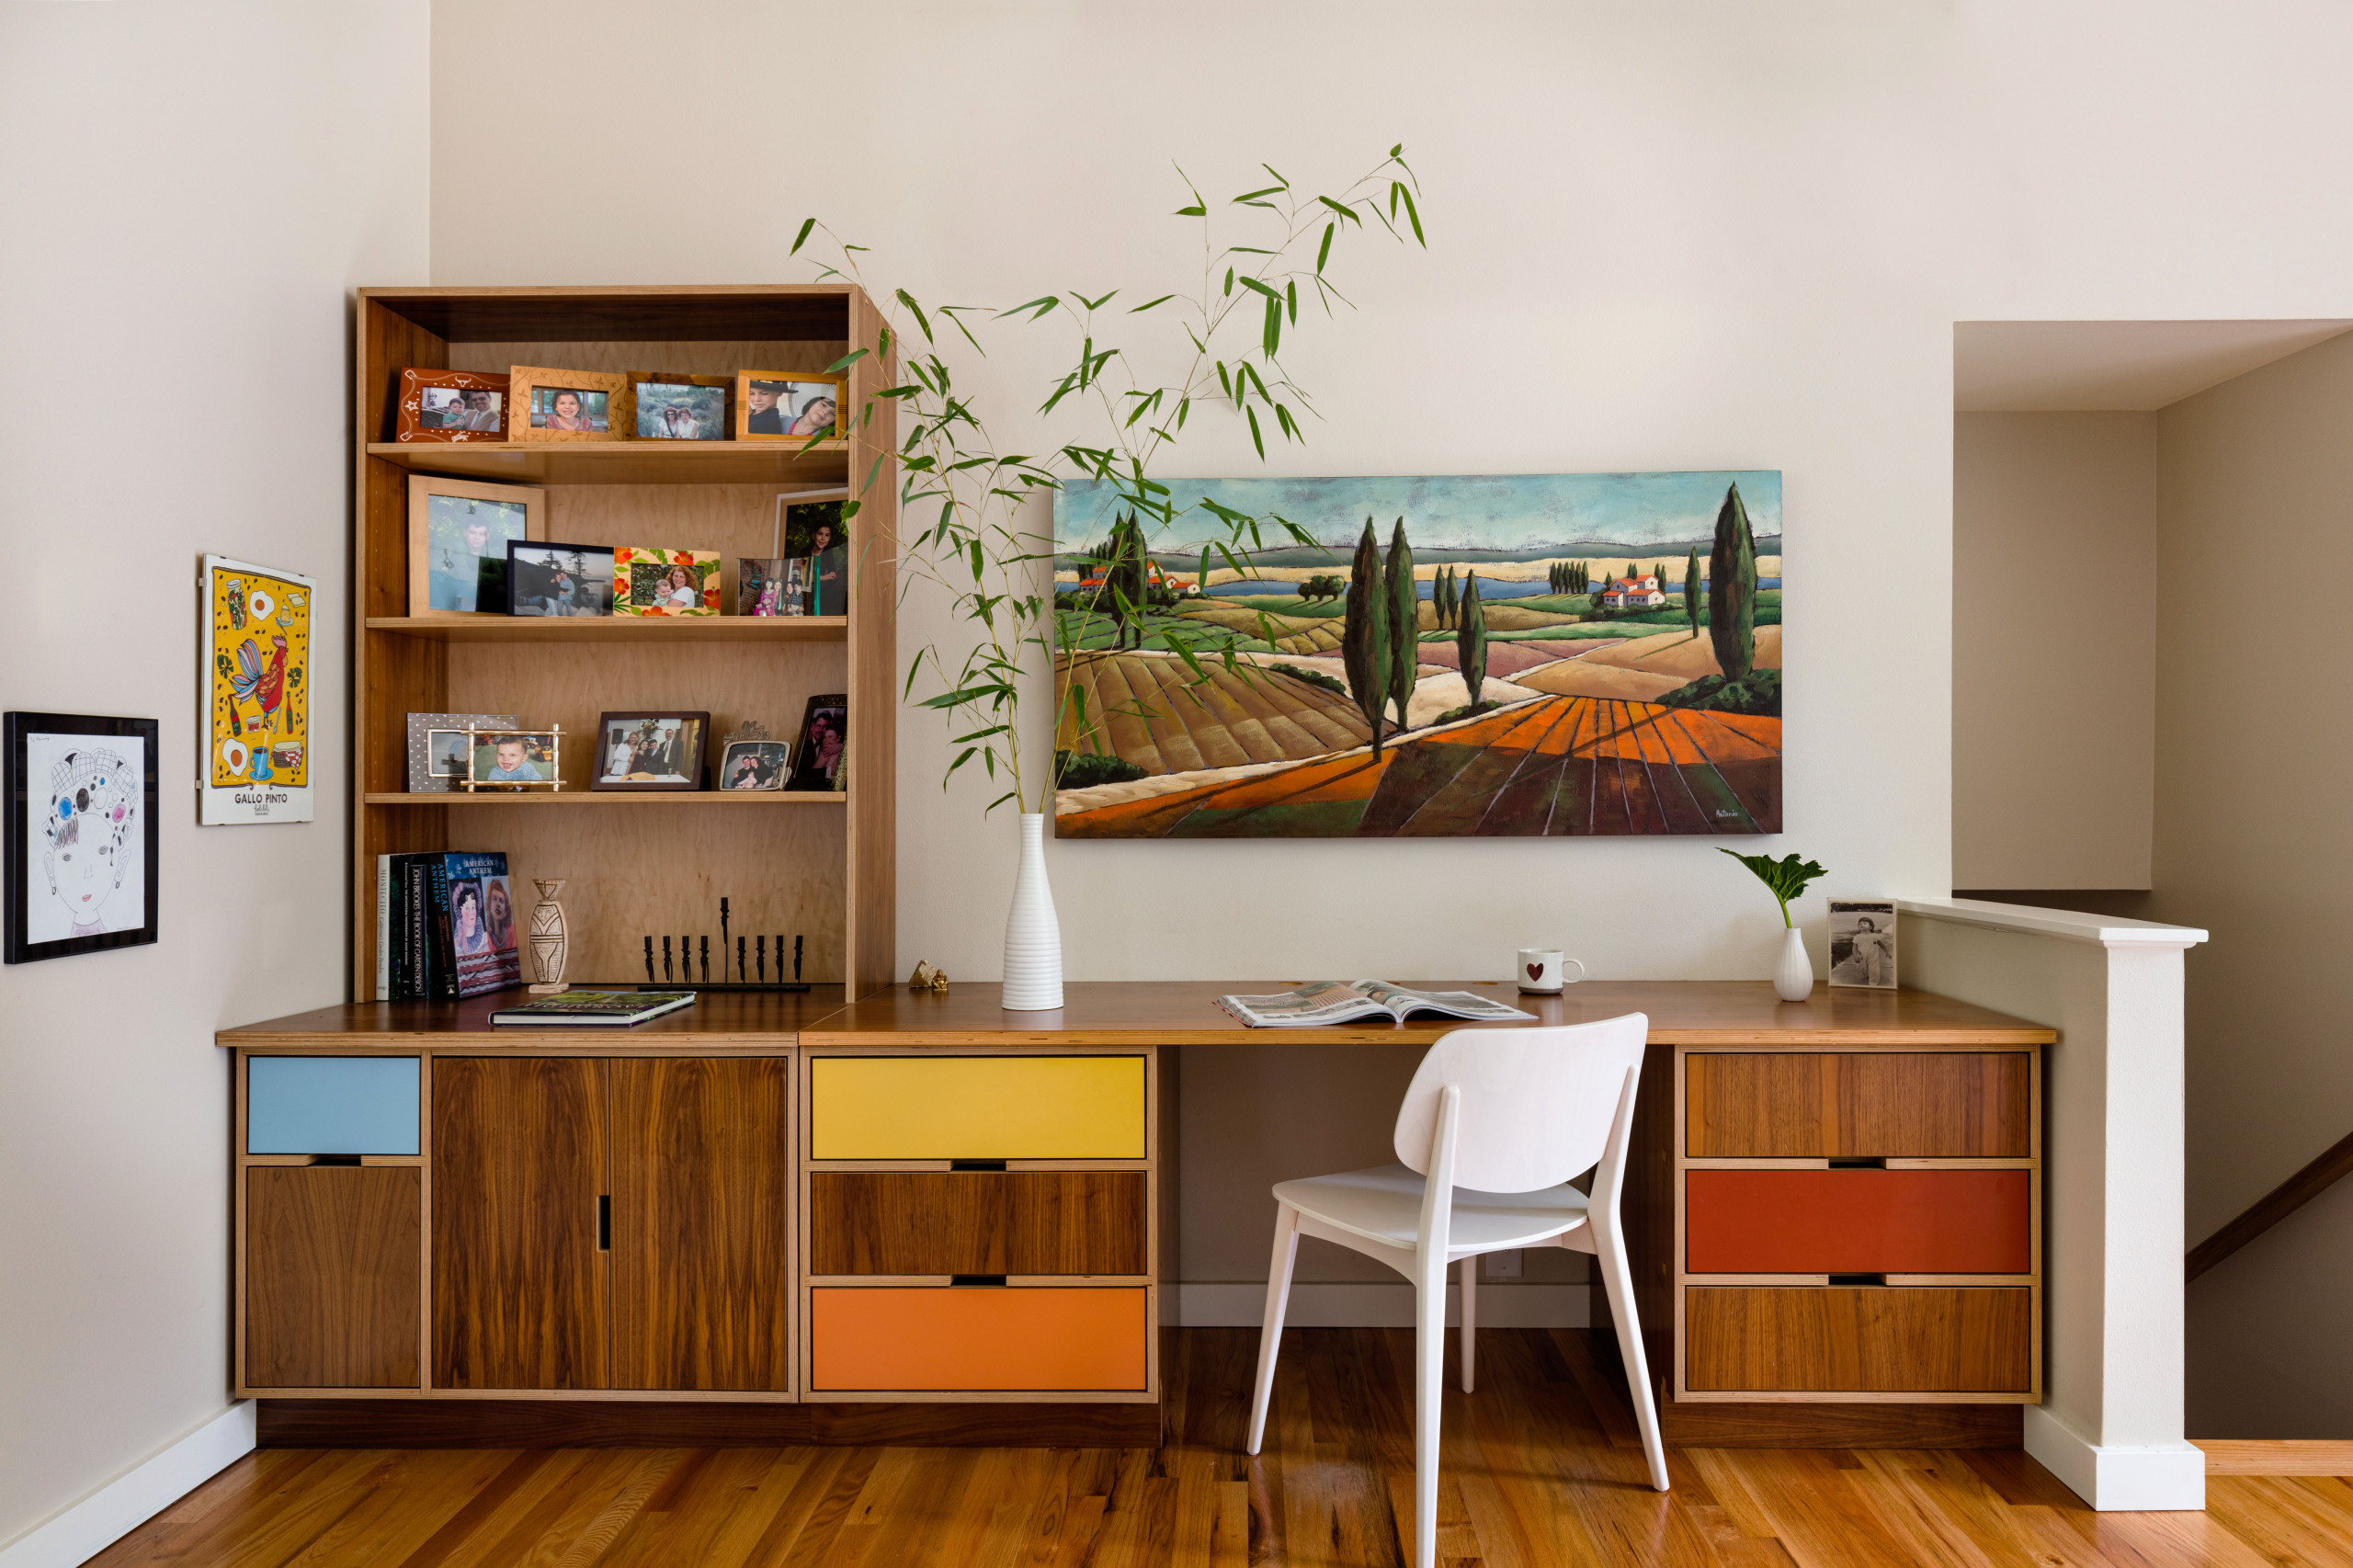 https://st.hzcdn.com/simgs/pictures/home-offices/mid-century-interior-remodel-ellen-weiss-design-img~4ee1a1840e1a5fd8_14-6799-1-94ce116.jpg